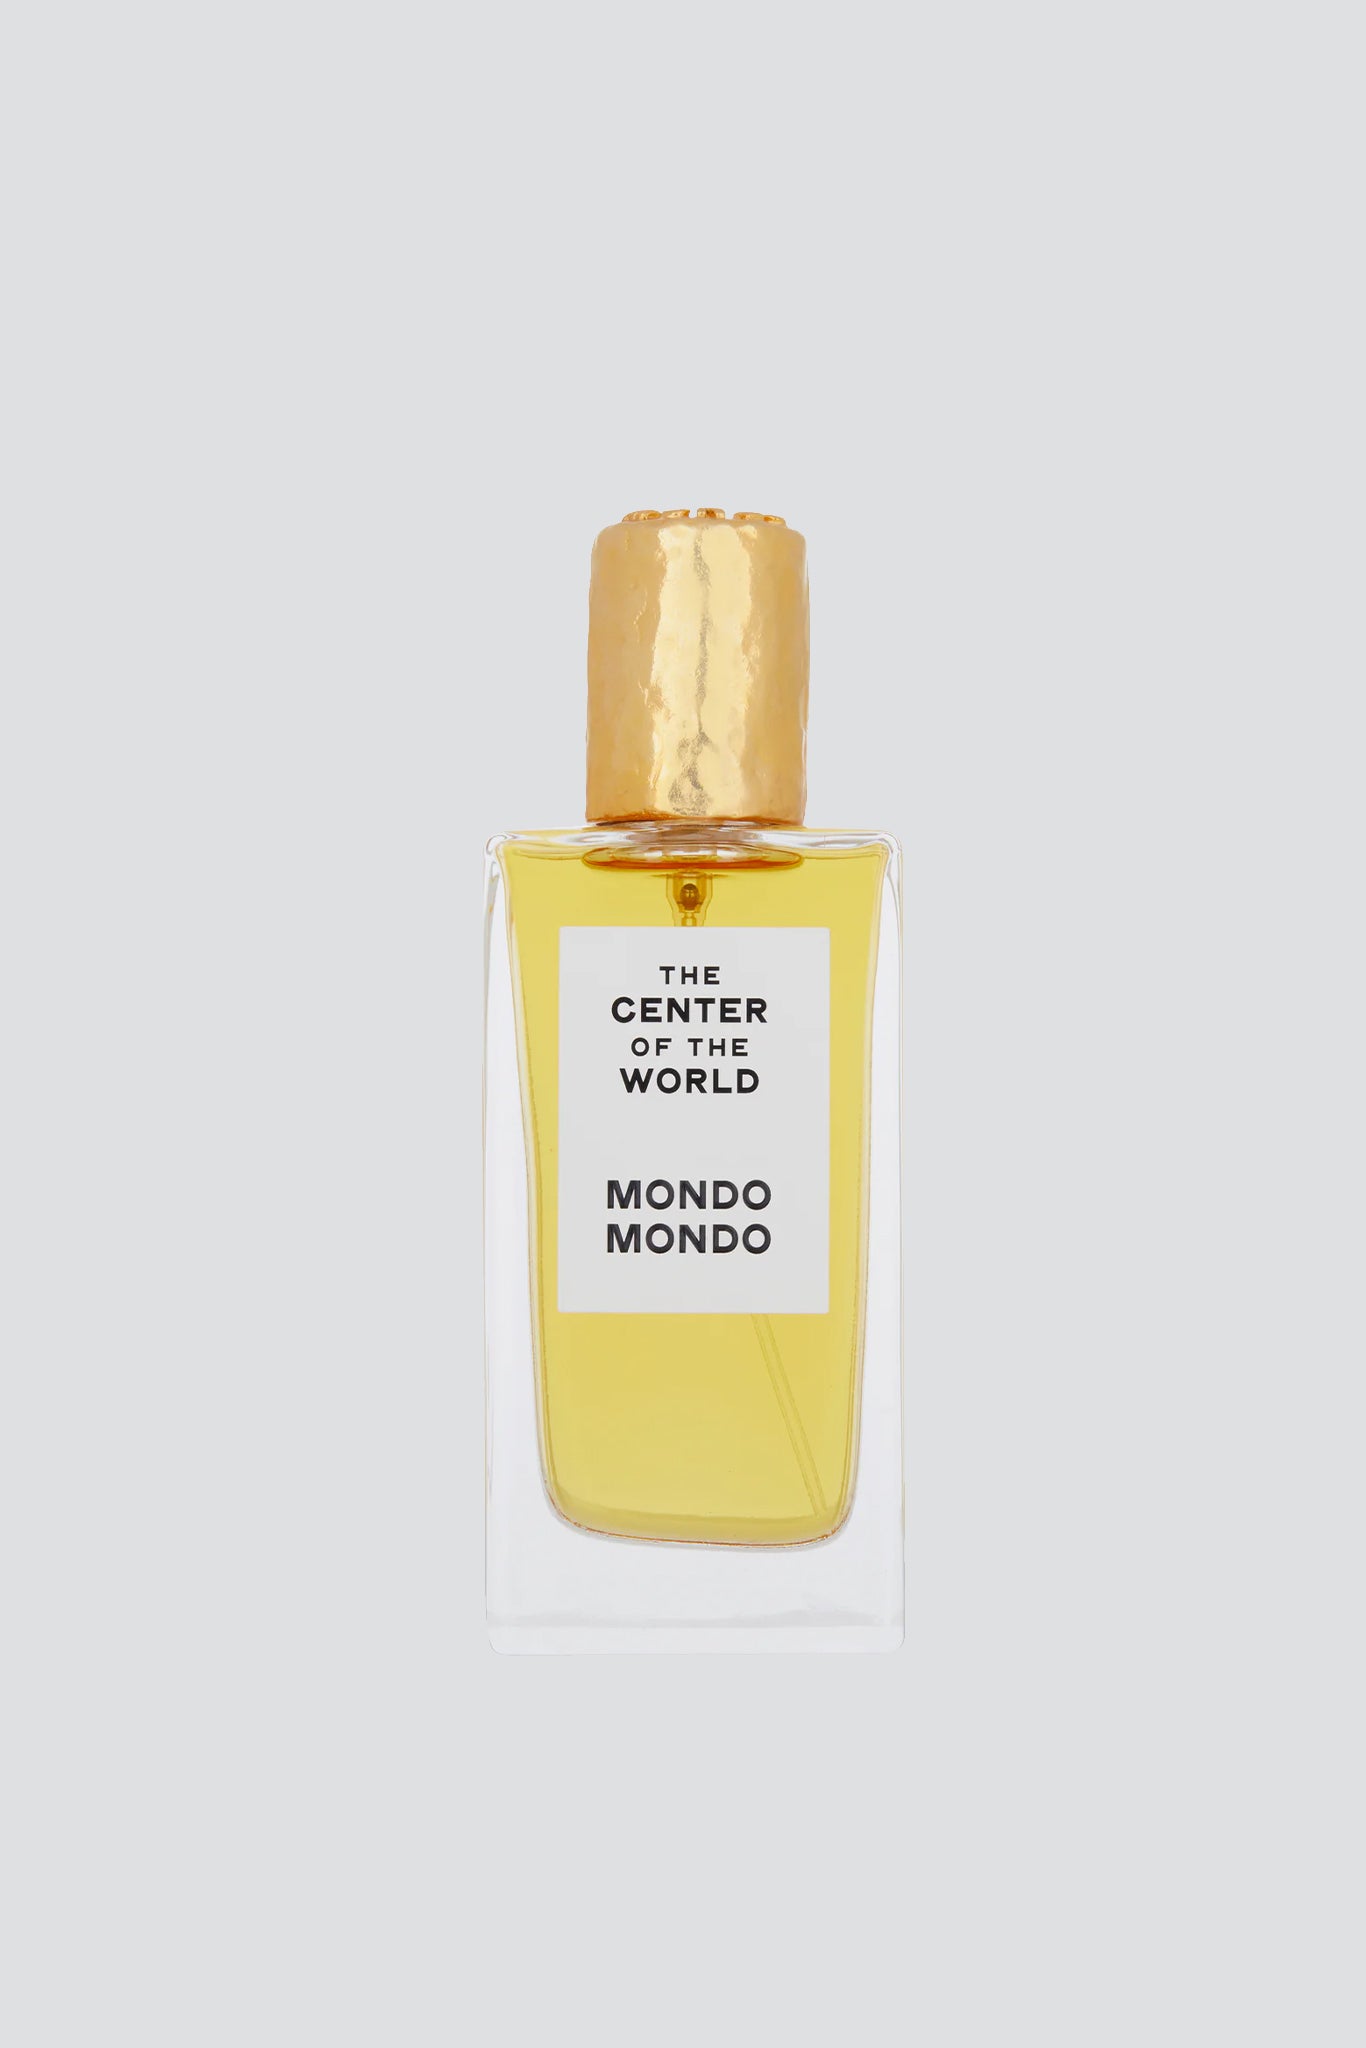 The Center of the World Perfume